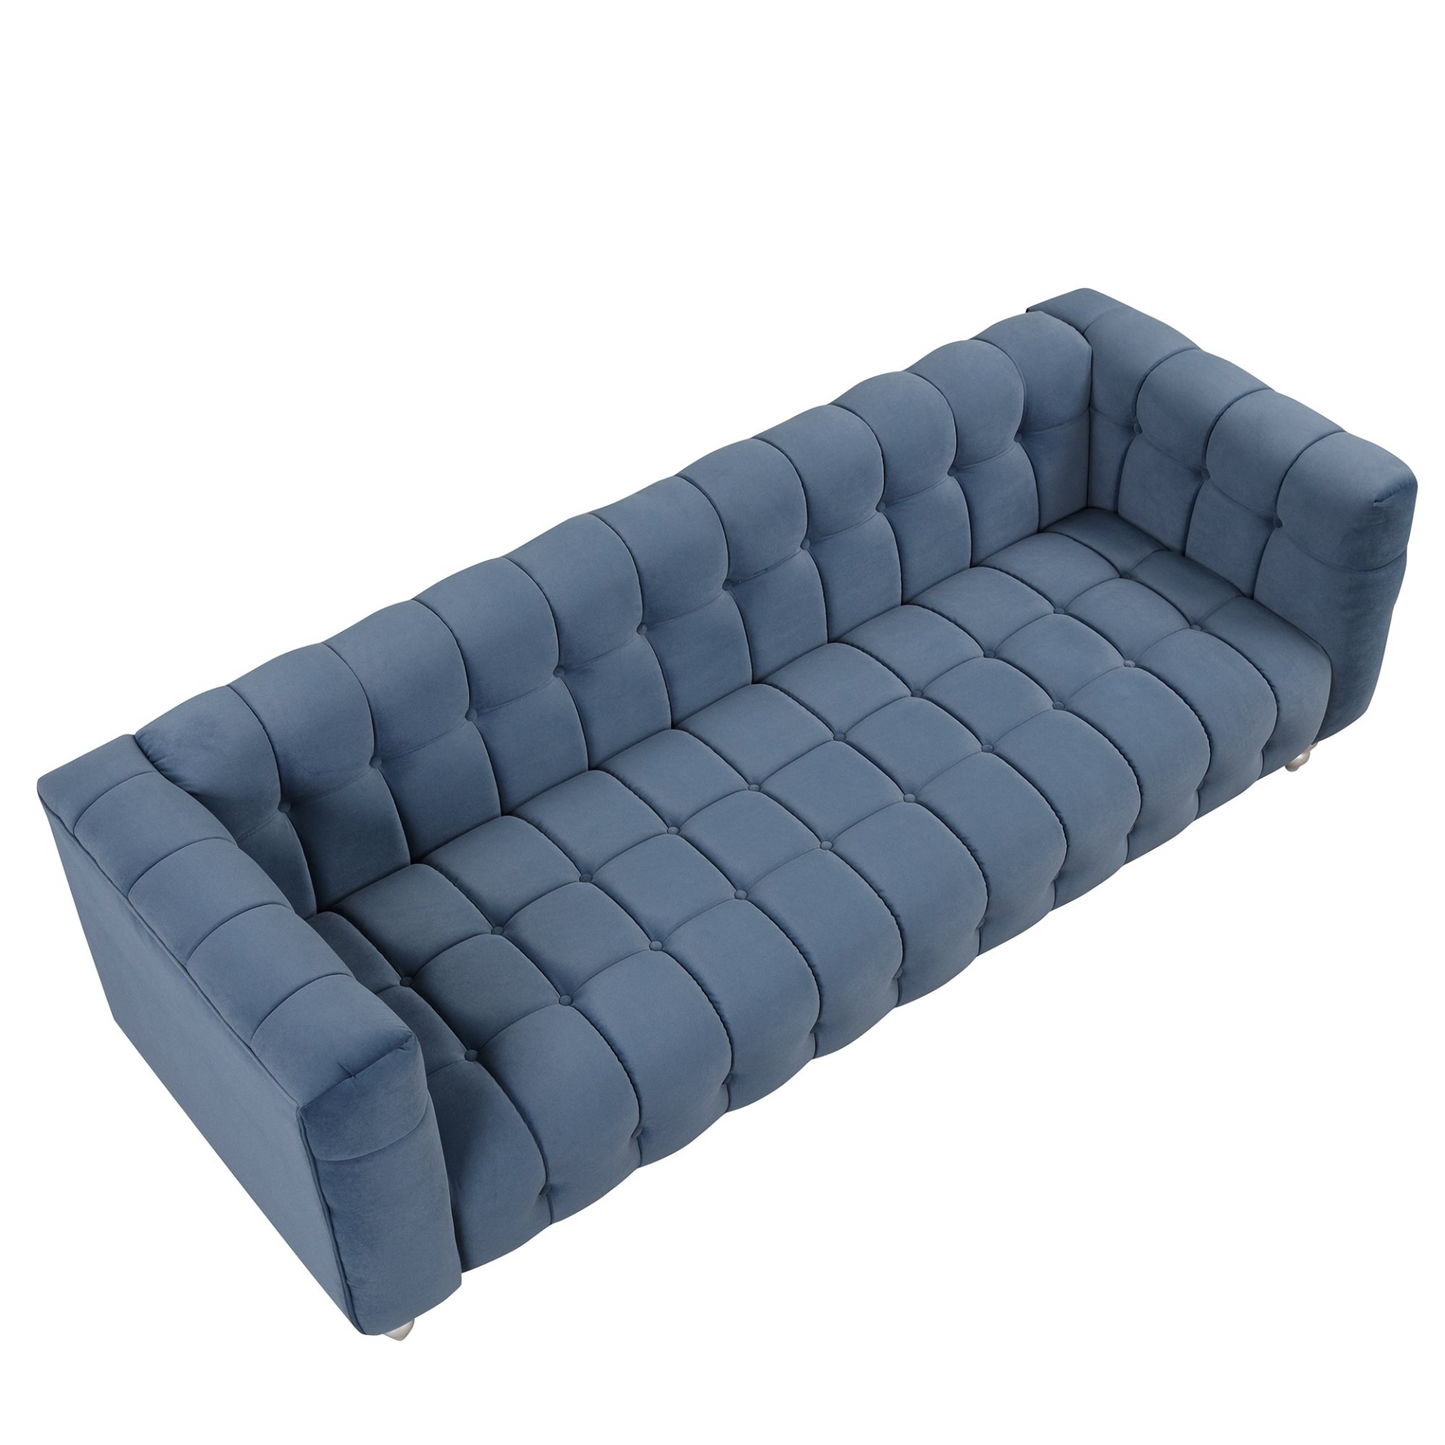 89" Modern Sofa Dutch Fluff Upholstered sofa with solid wood legs, buttoned tufted backrest,blue